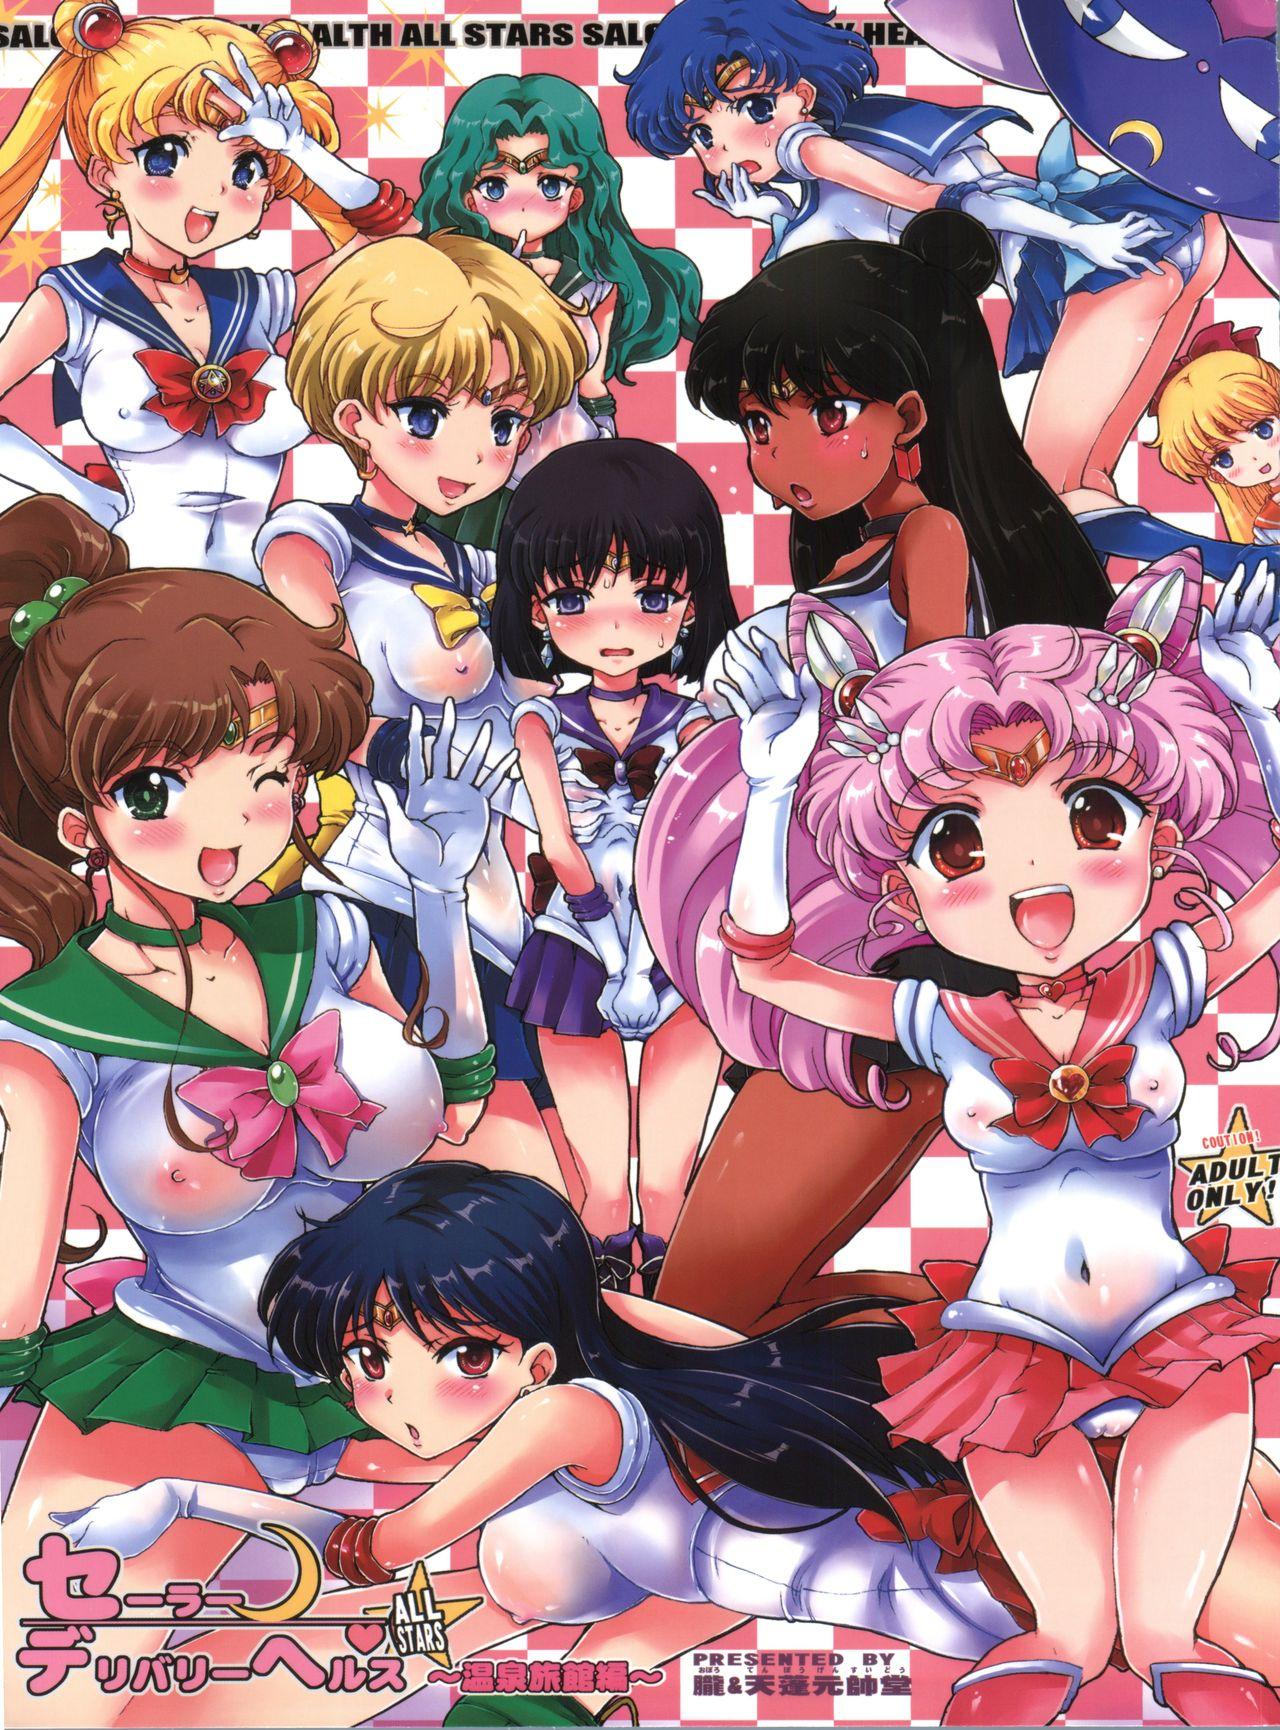 Hot Naked Women Sailor Delivery Health All Stars - Sailor moon Licking - Picture 1